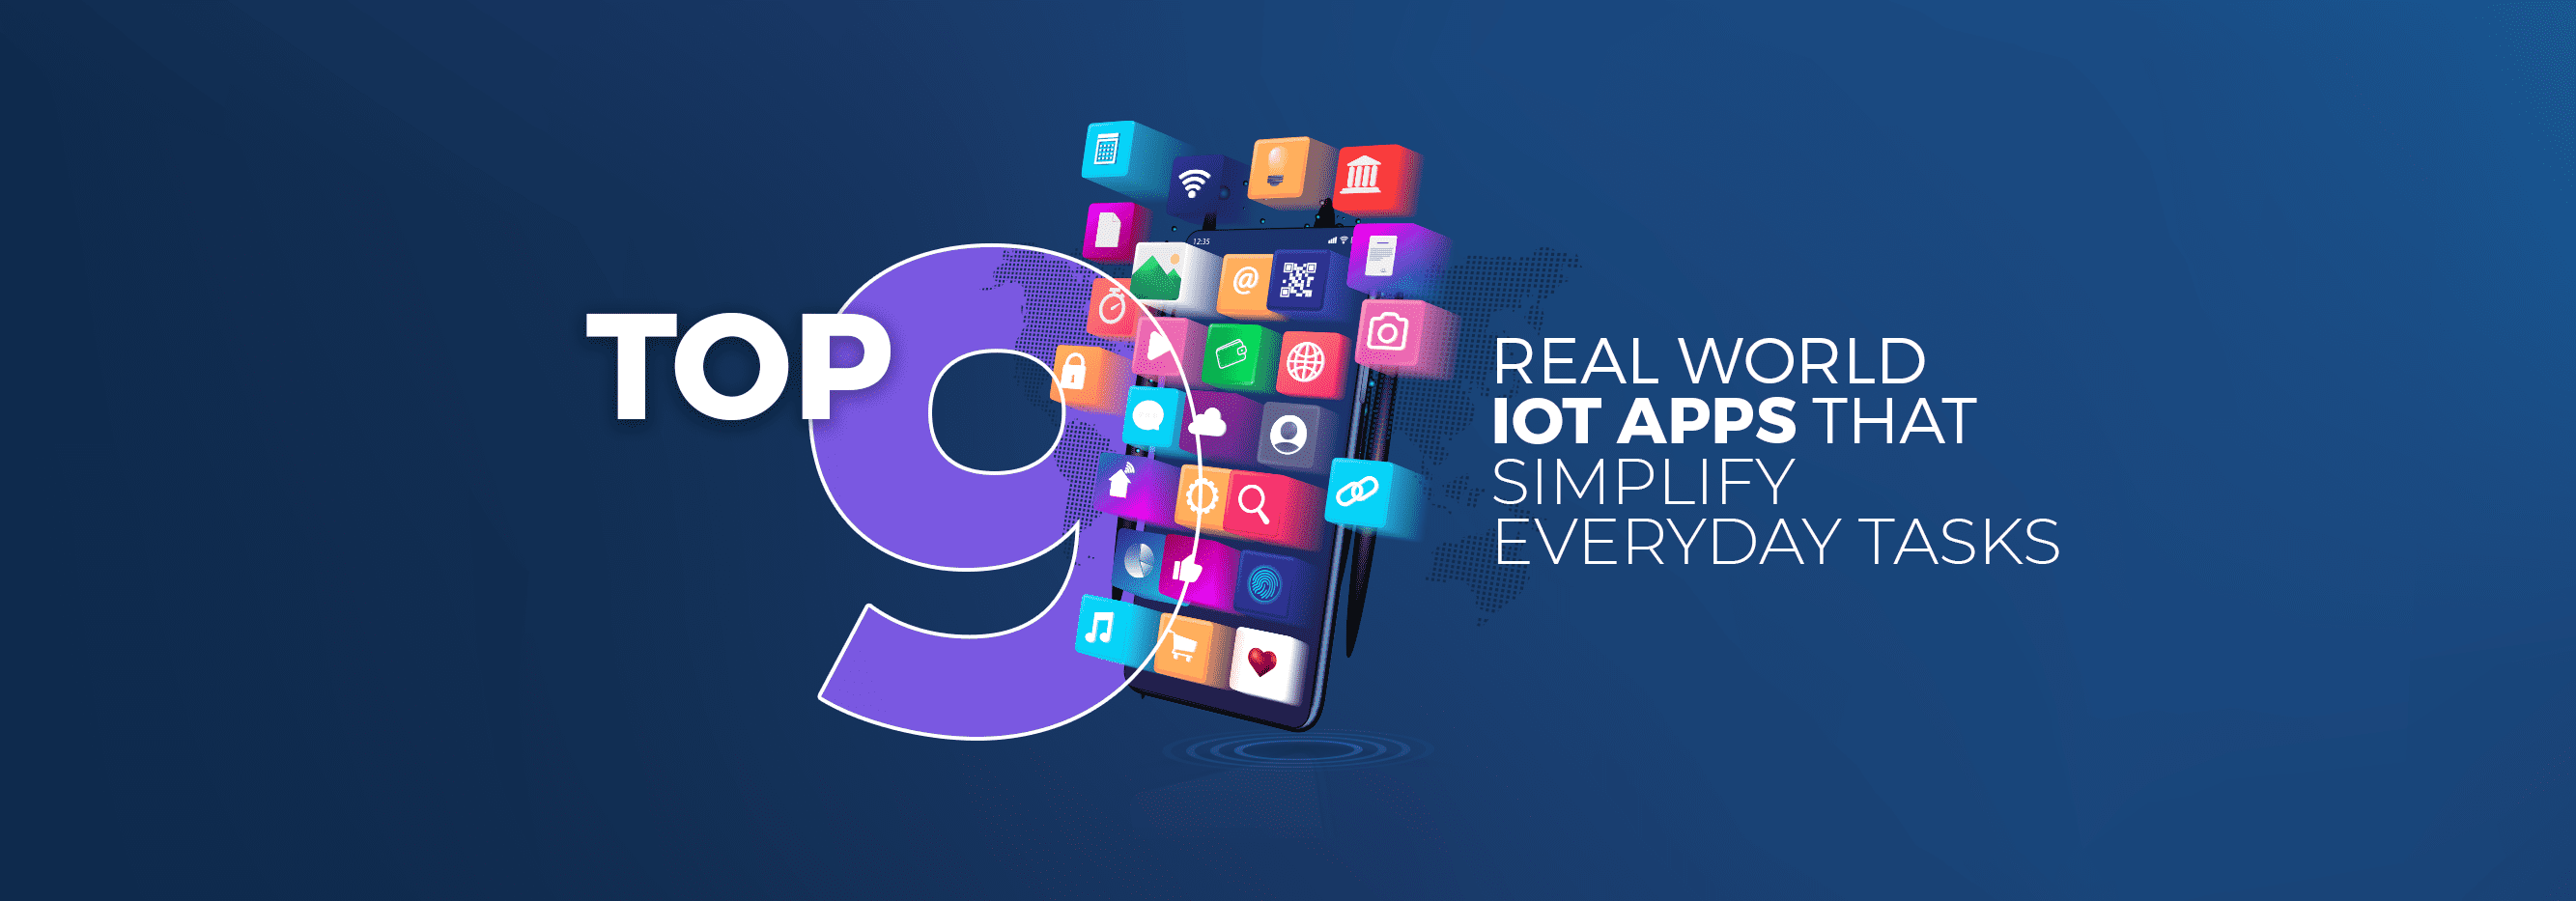 Top 9 Real World IoT apps that Simplify Everyday Tasks_banner